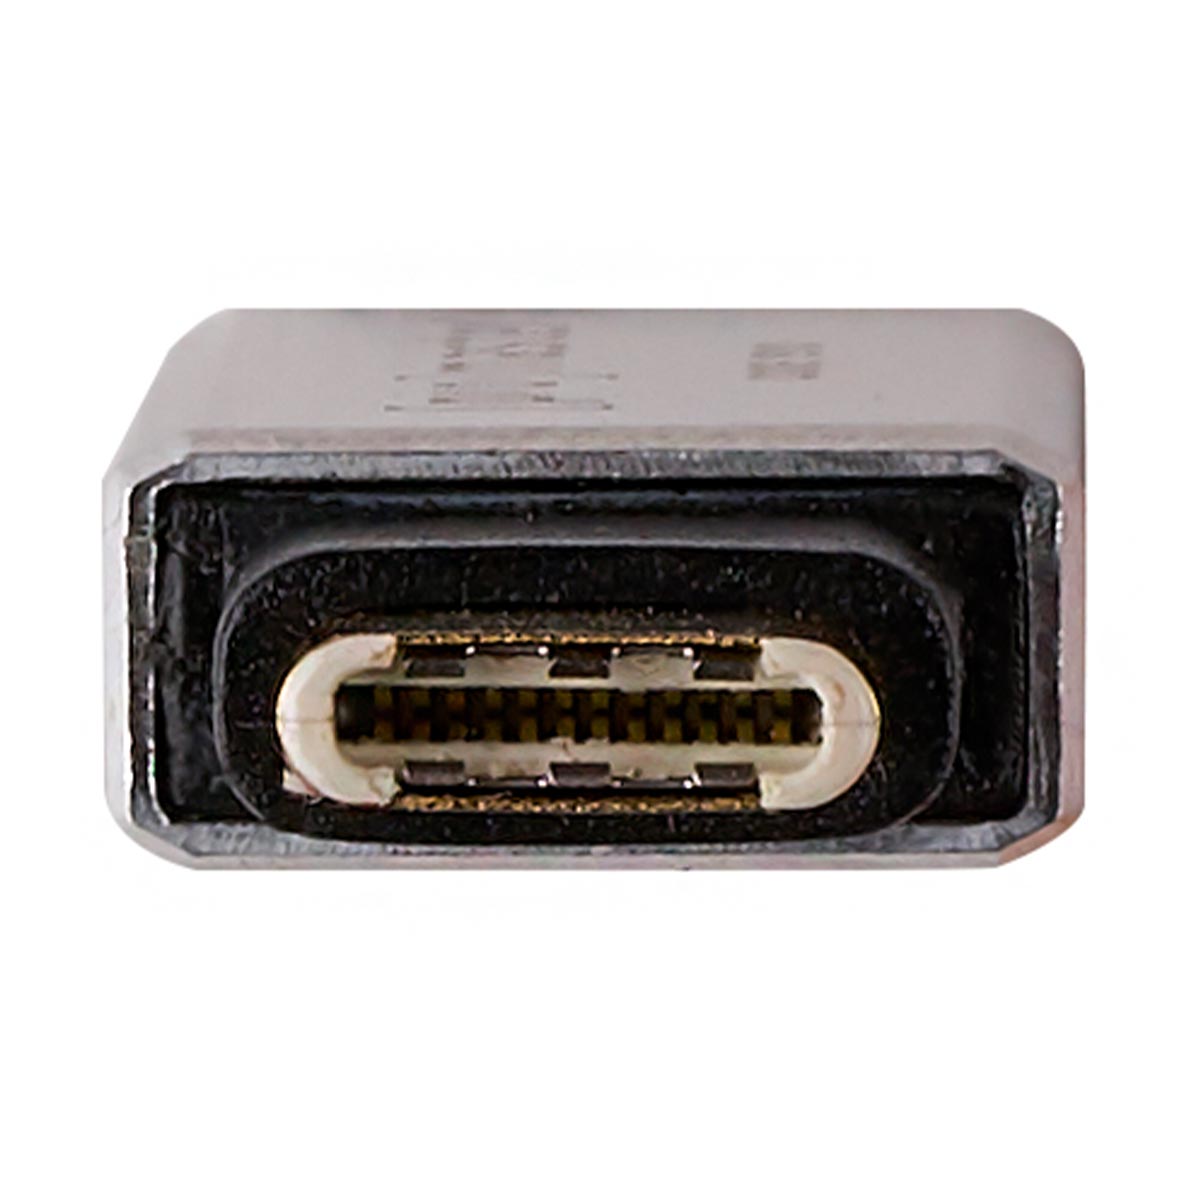 Promaster USB-C Male to USB-A Female Adapter